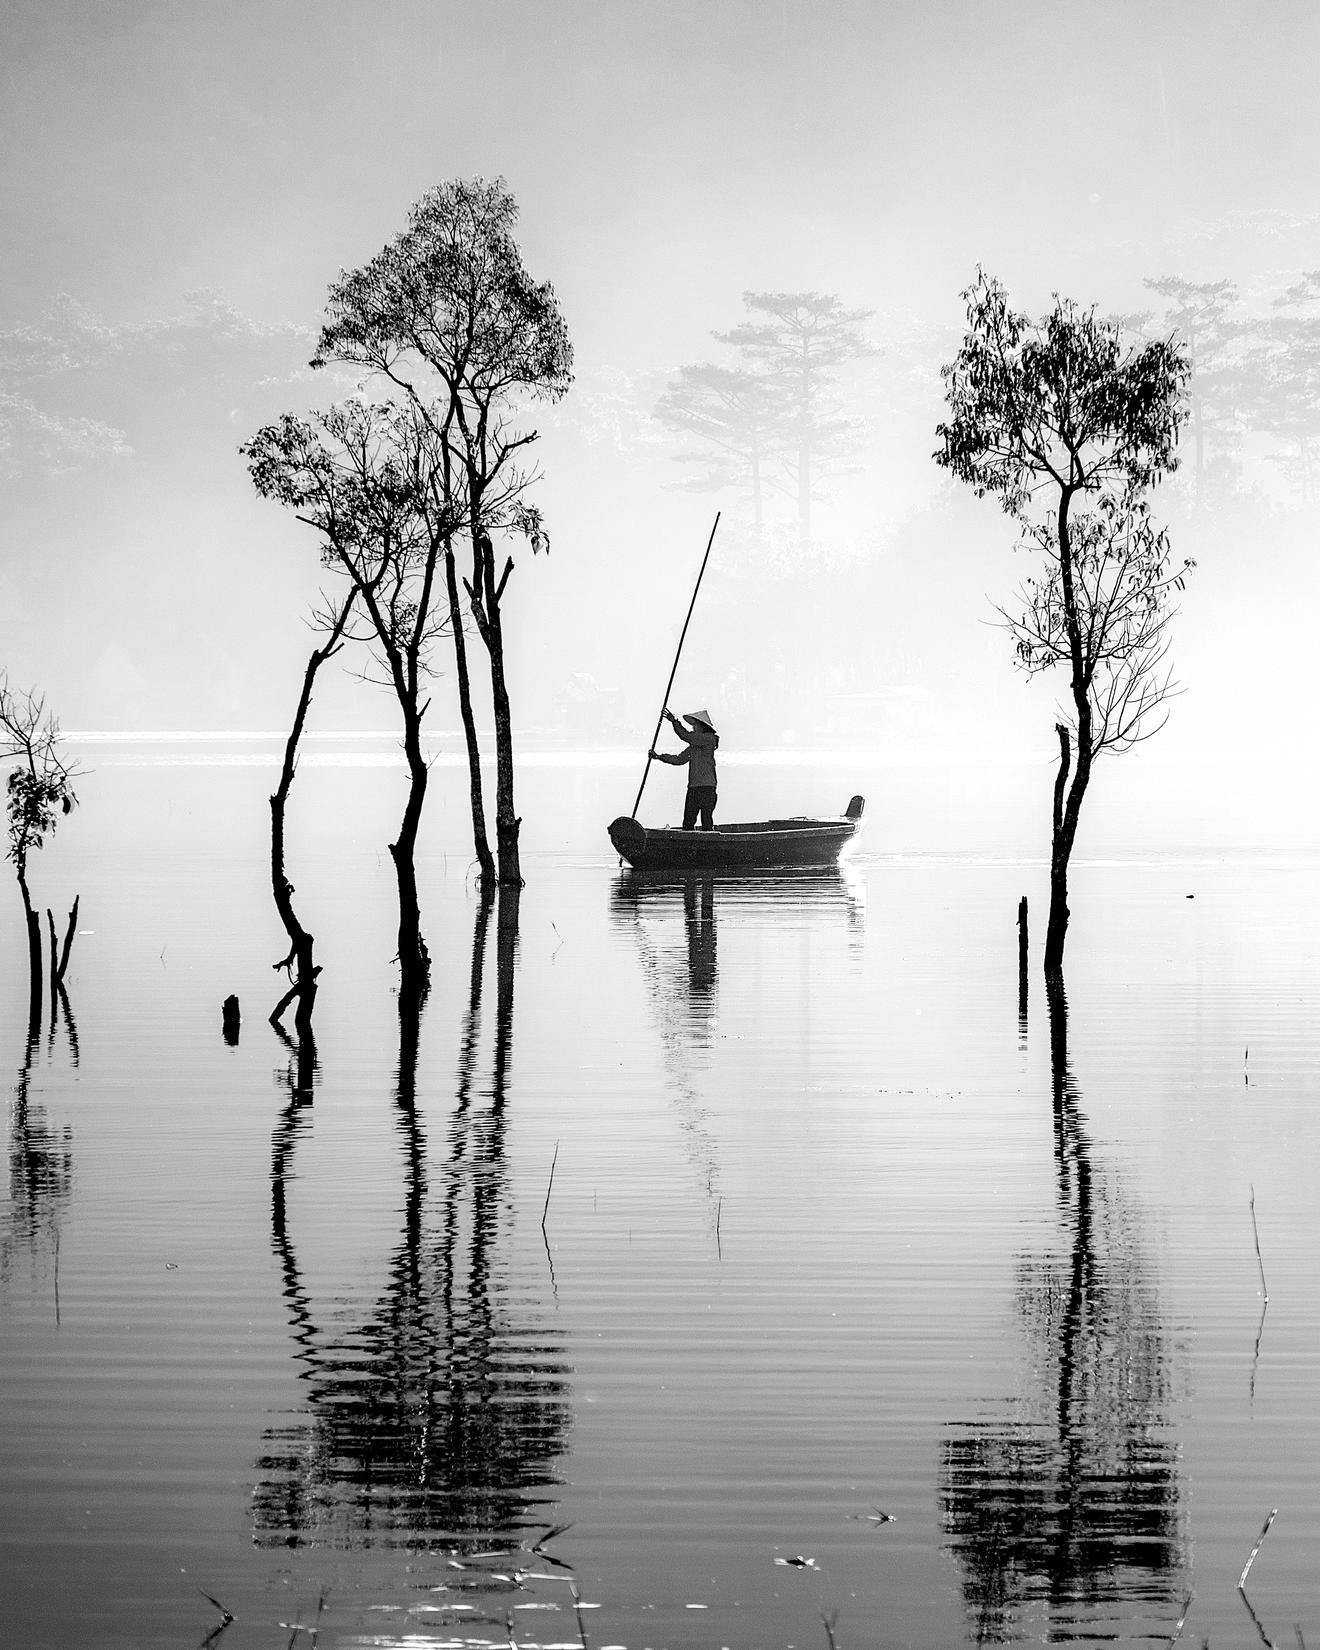 A traditional boatman sailing amongst trees in Vietnam